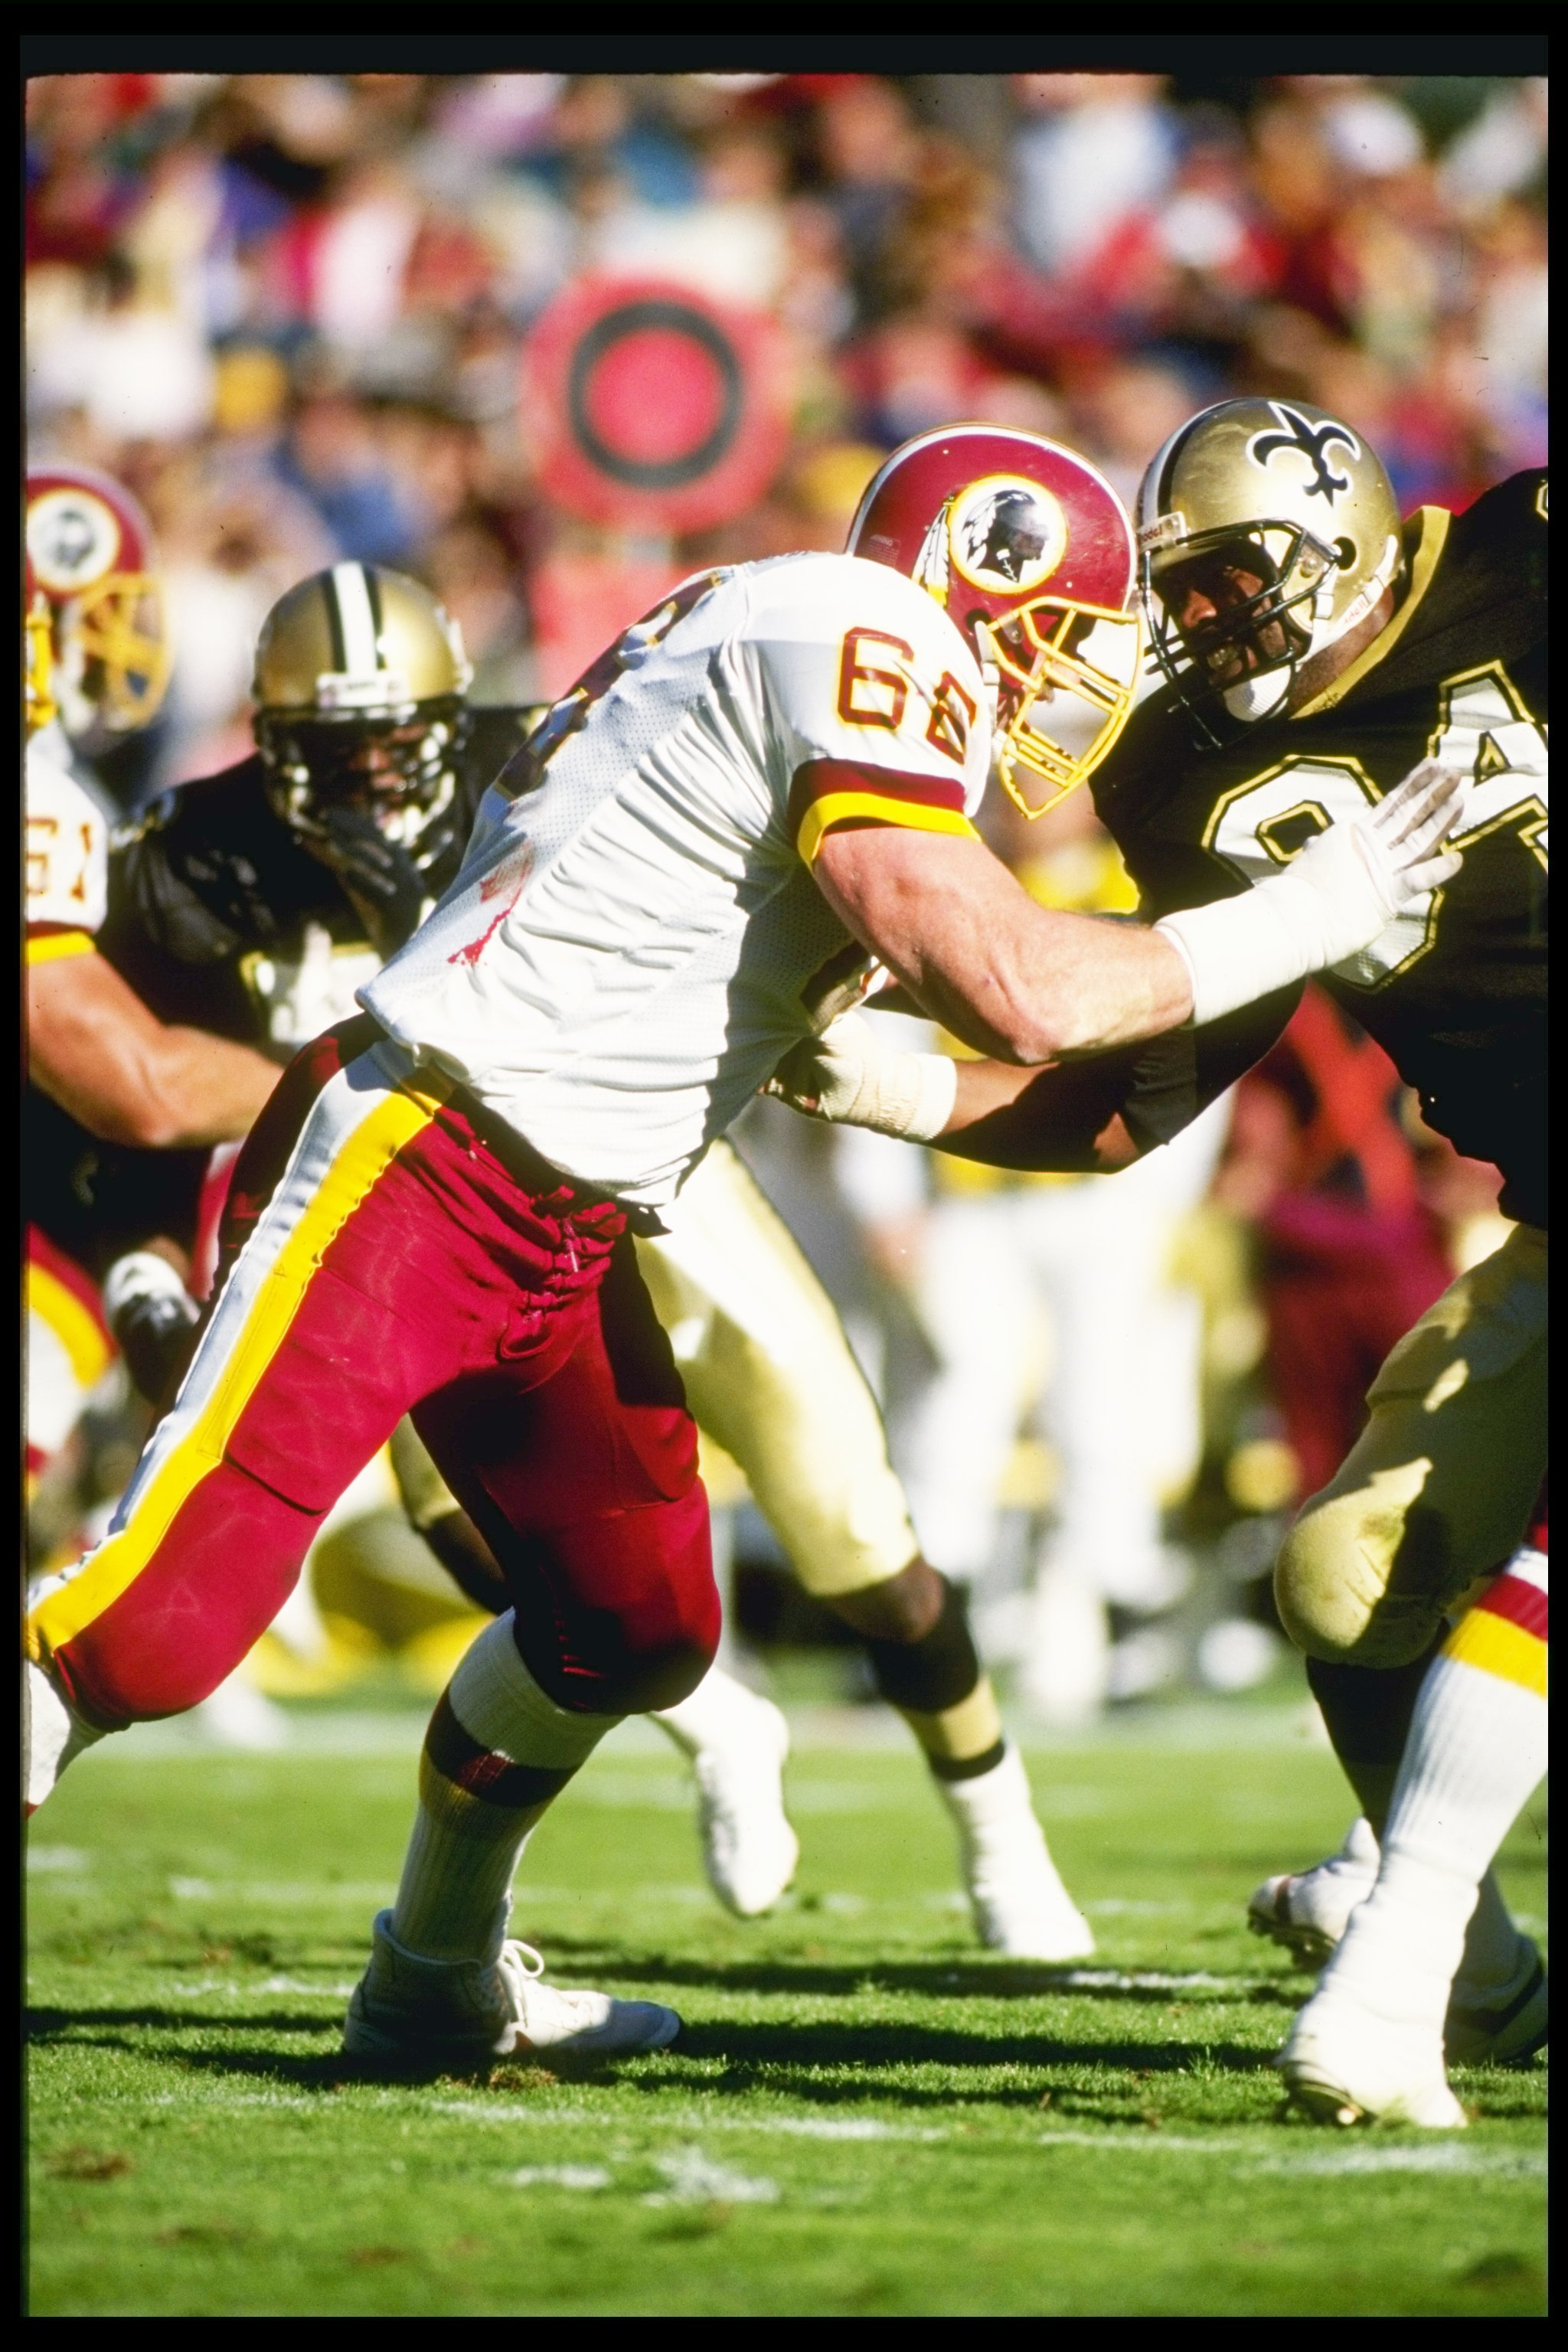 Joe Jacoby on Donnie Warren's continued exclusion from Redskins